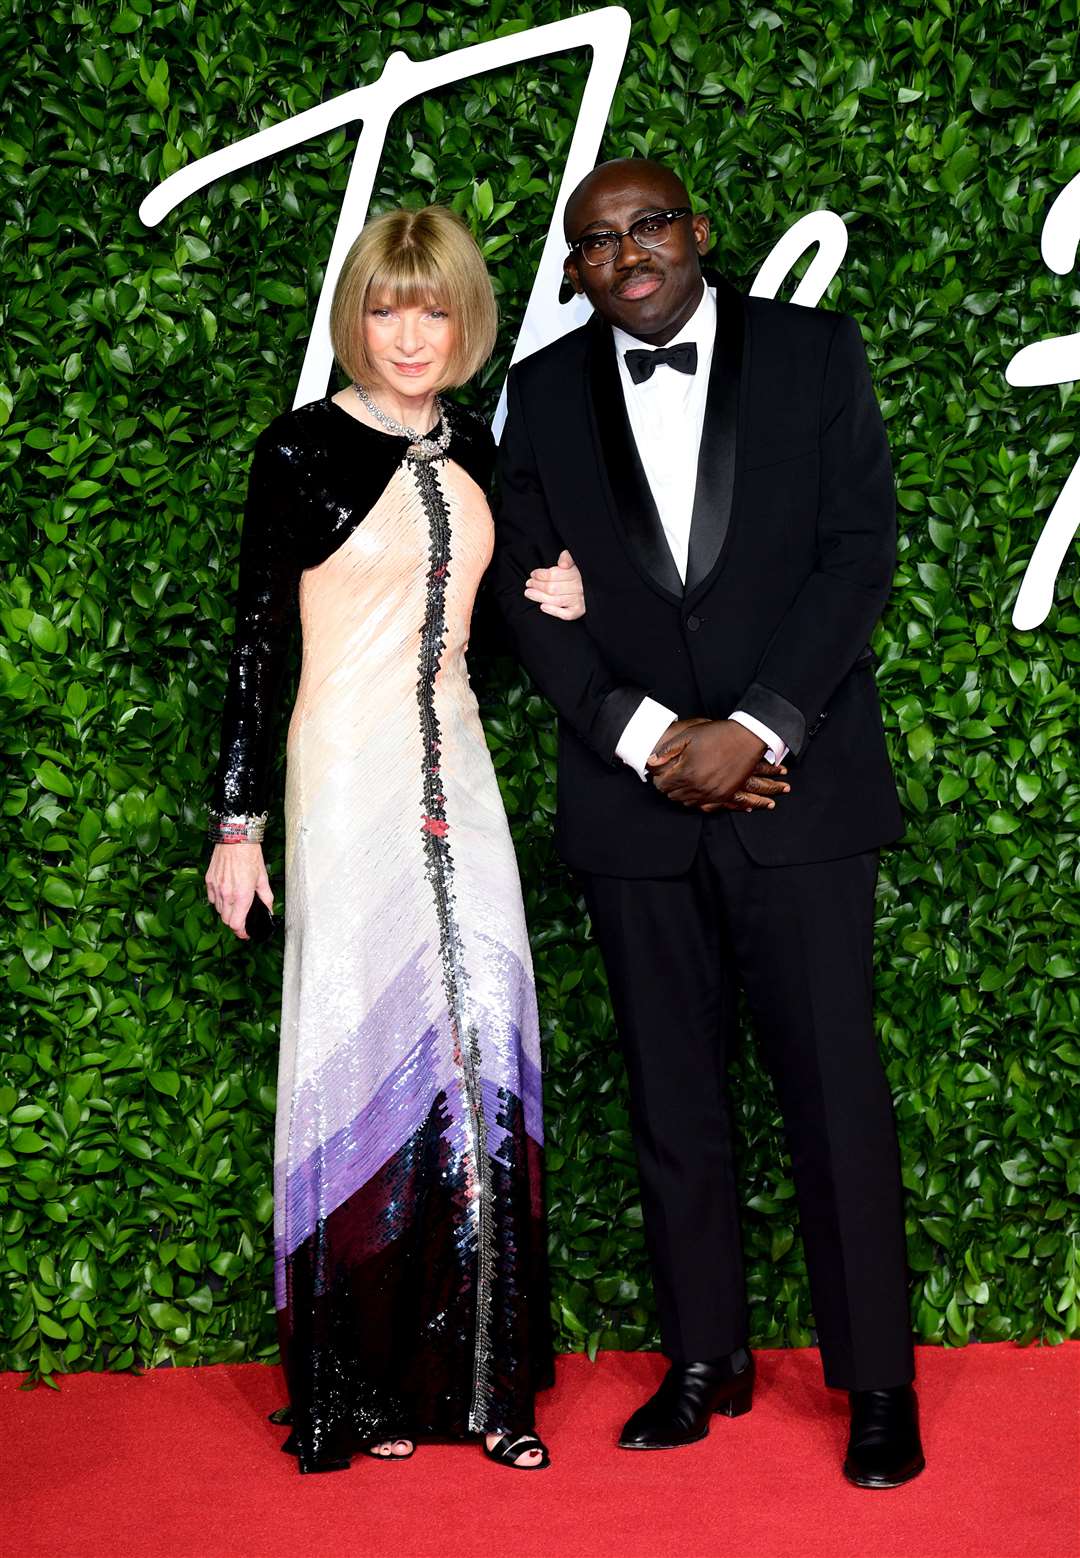 Dame Anna Wintour and Edward Enninful attending the Fashion Awards 2019 at the Royal Albert Hall (Ian West/PA)